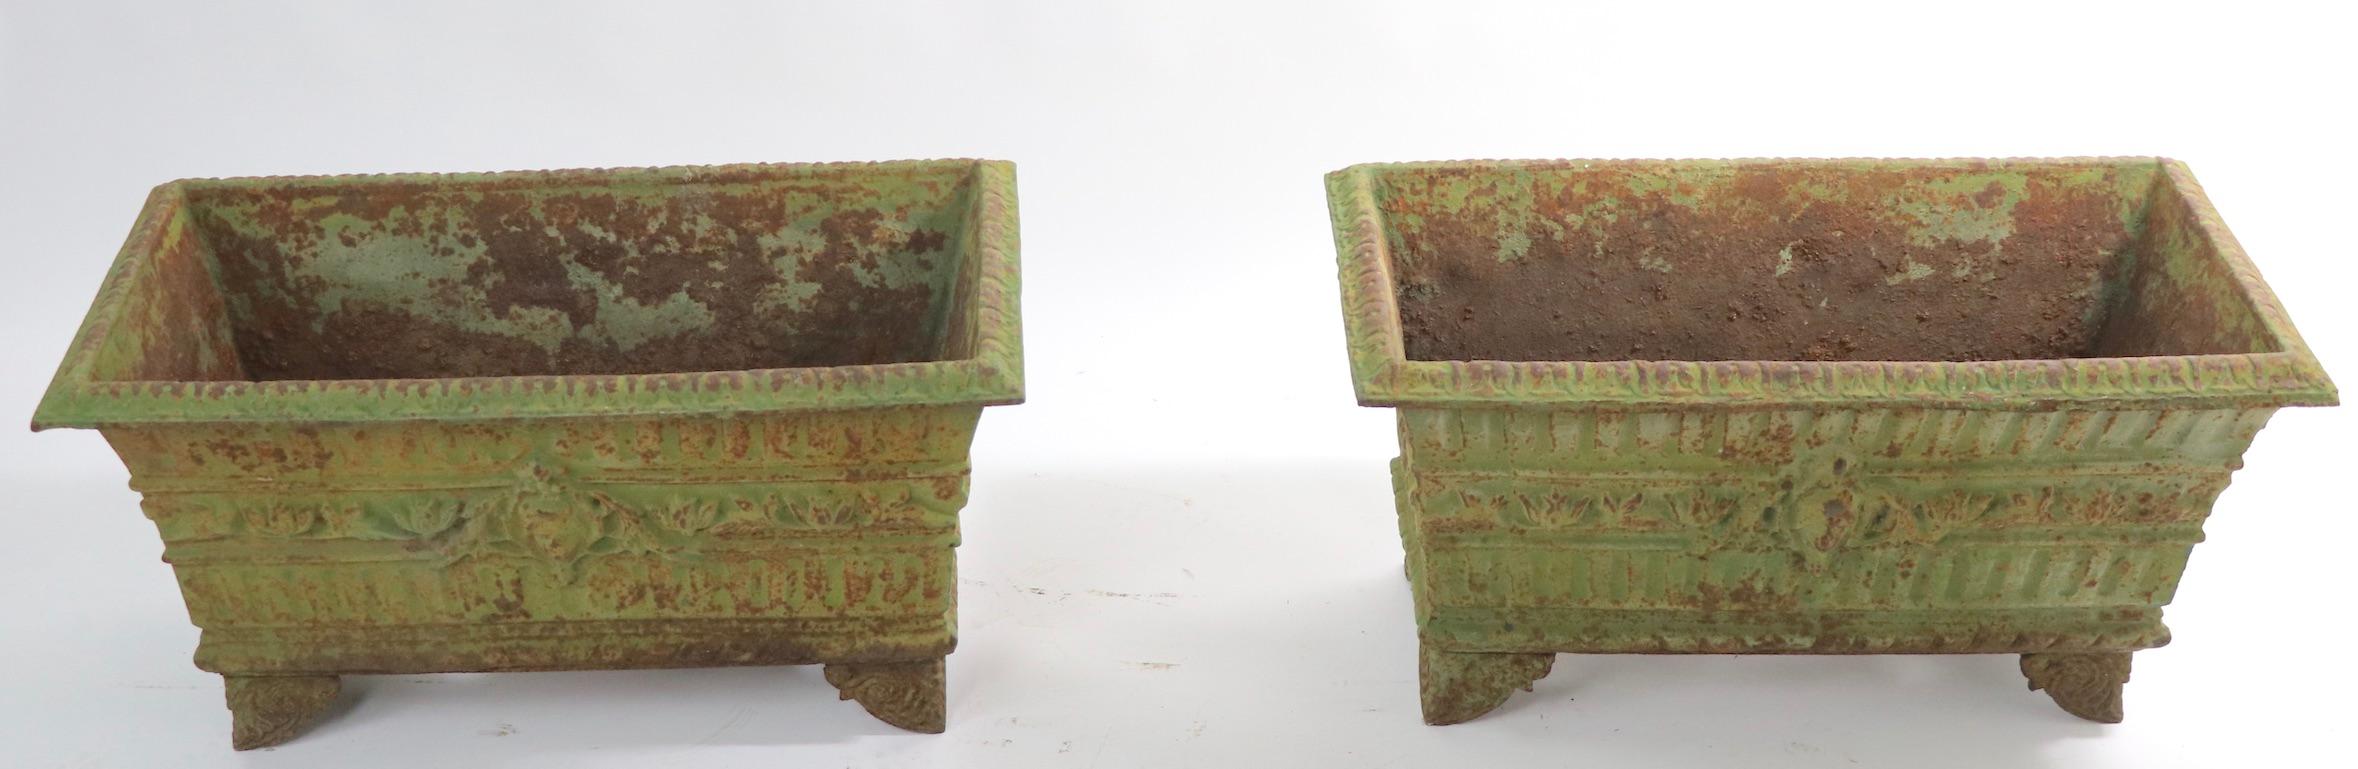 Wonderful pair of 19th century cast iron planters in original finish. Both are in very good, original condition showing expected cosmetic wear to finish, normal and consistent with age. Probably French in origin, unsigned. Offered and priced as a